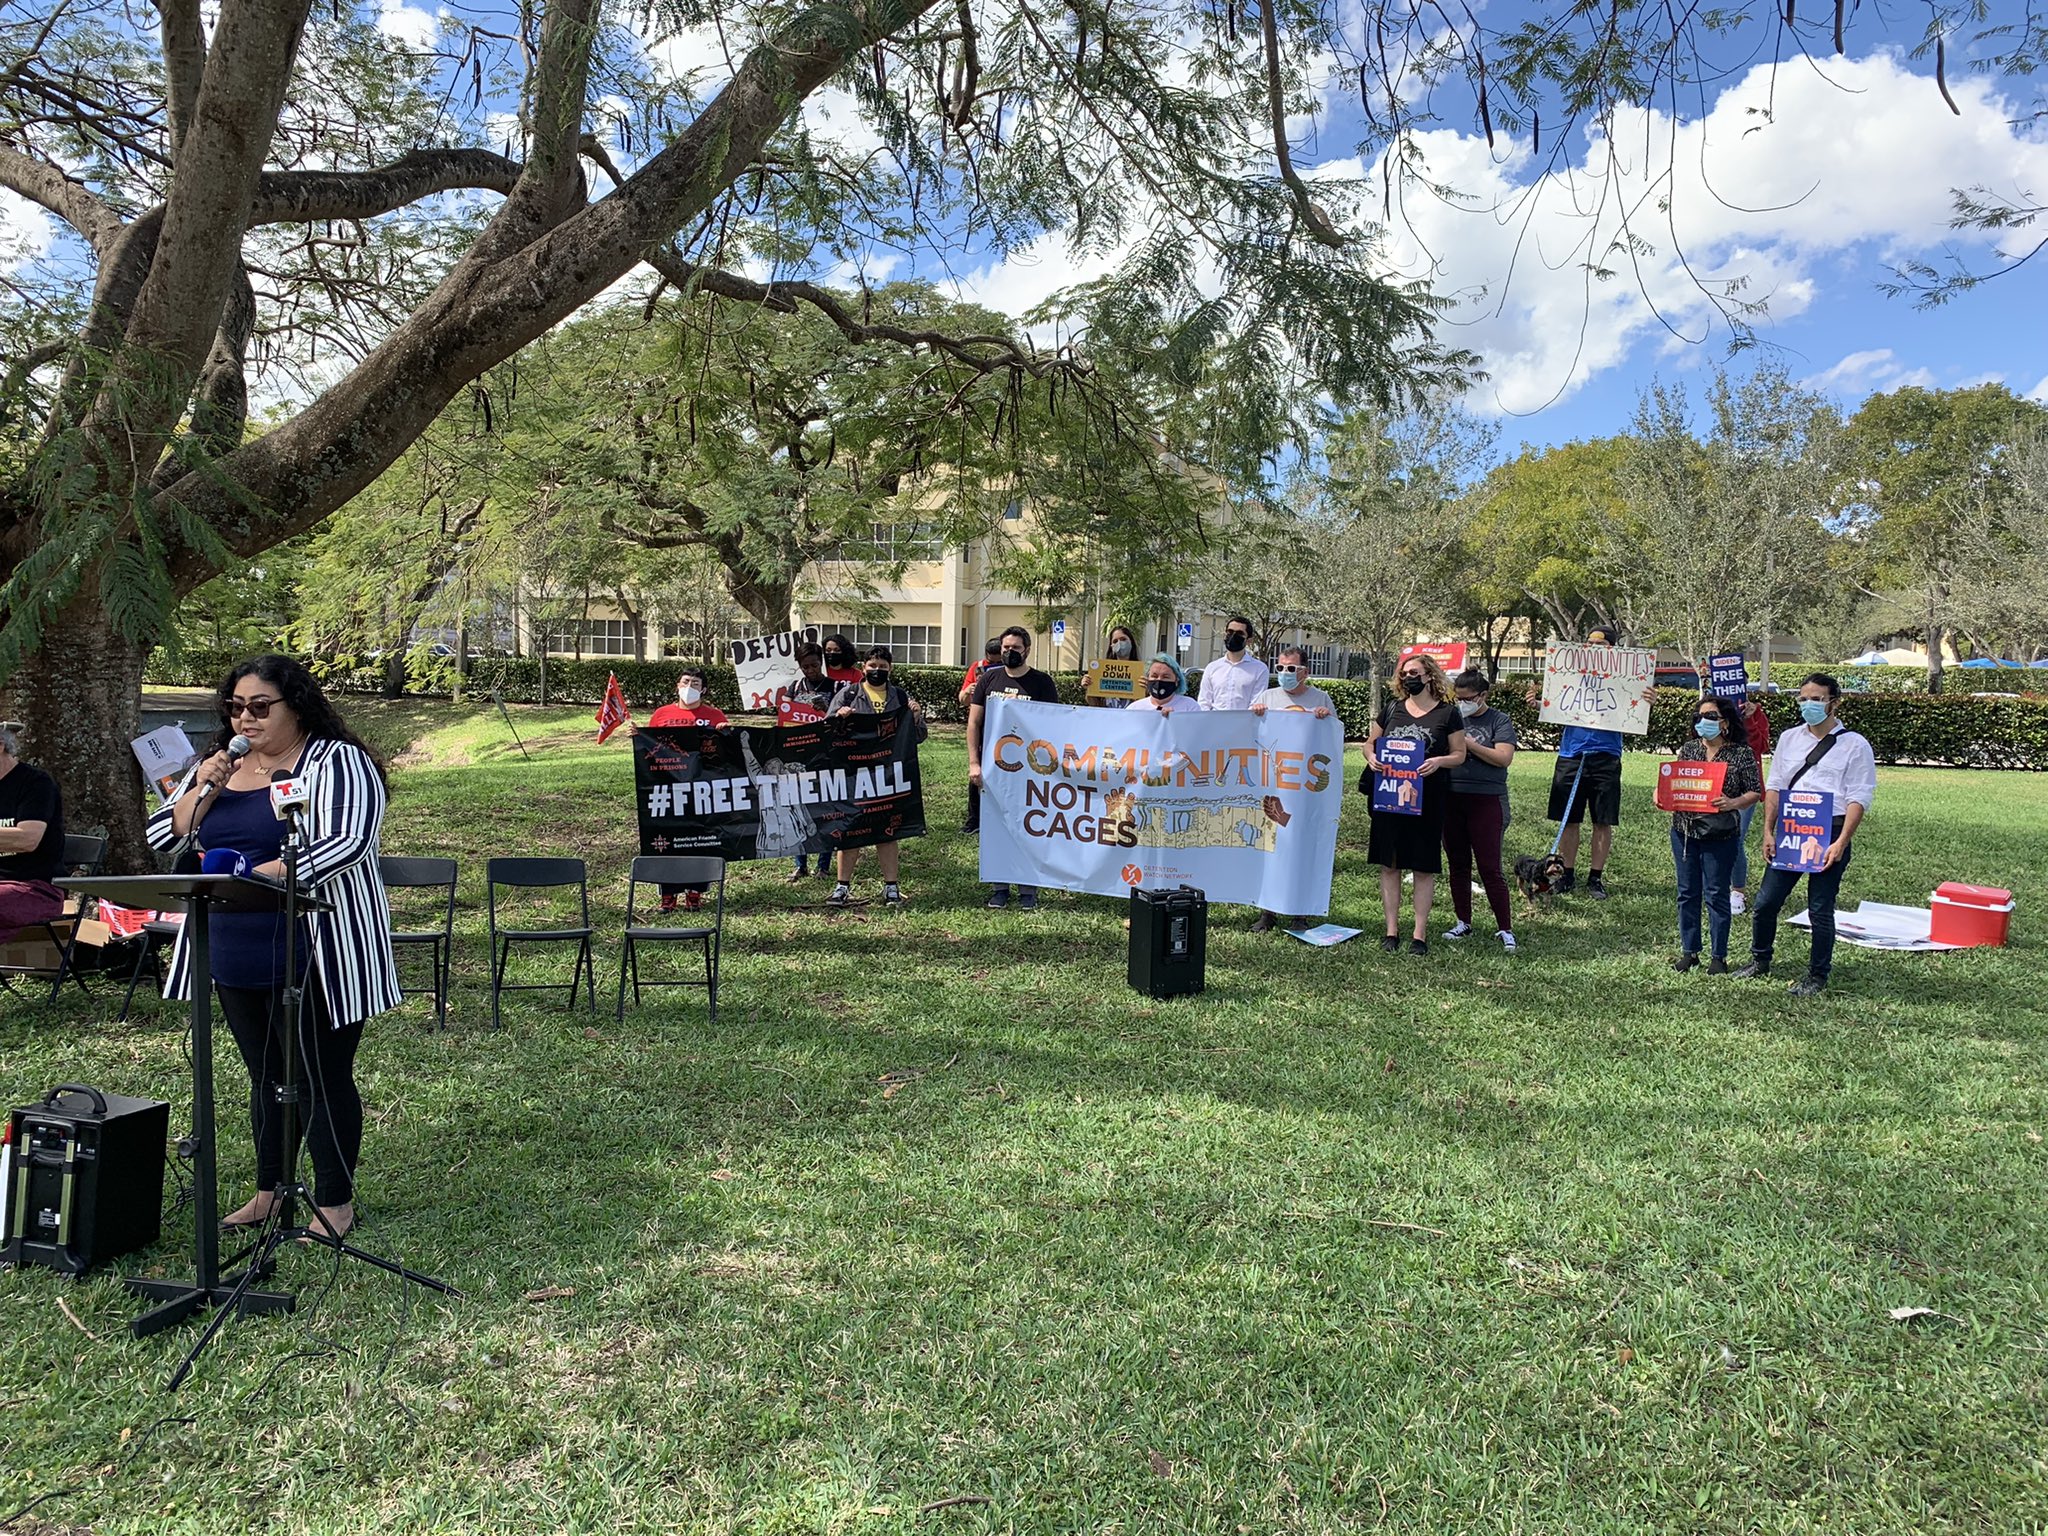 Florida communities hold press conference demanding Biden Administration shut down all detention centers, end deportations and release all people in immigration detention